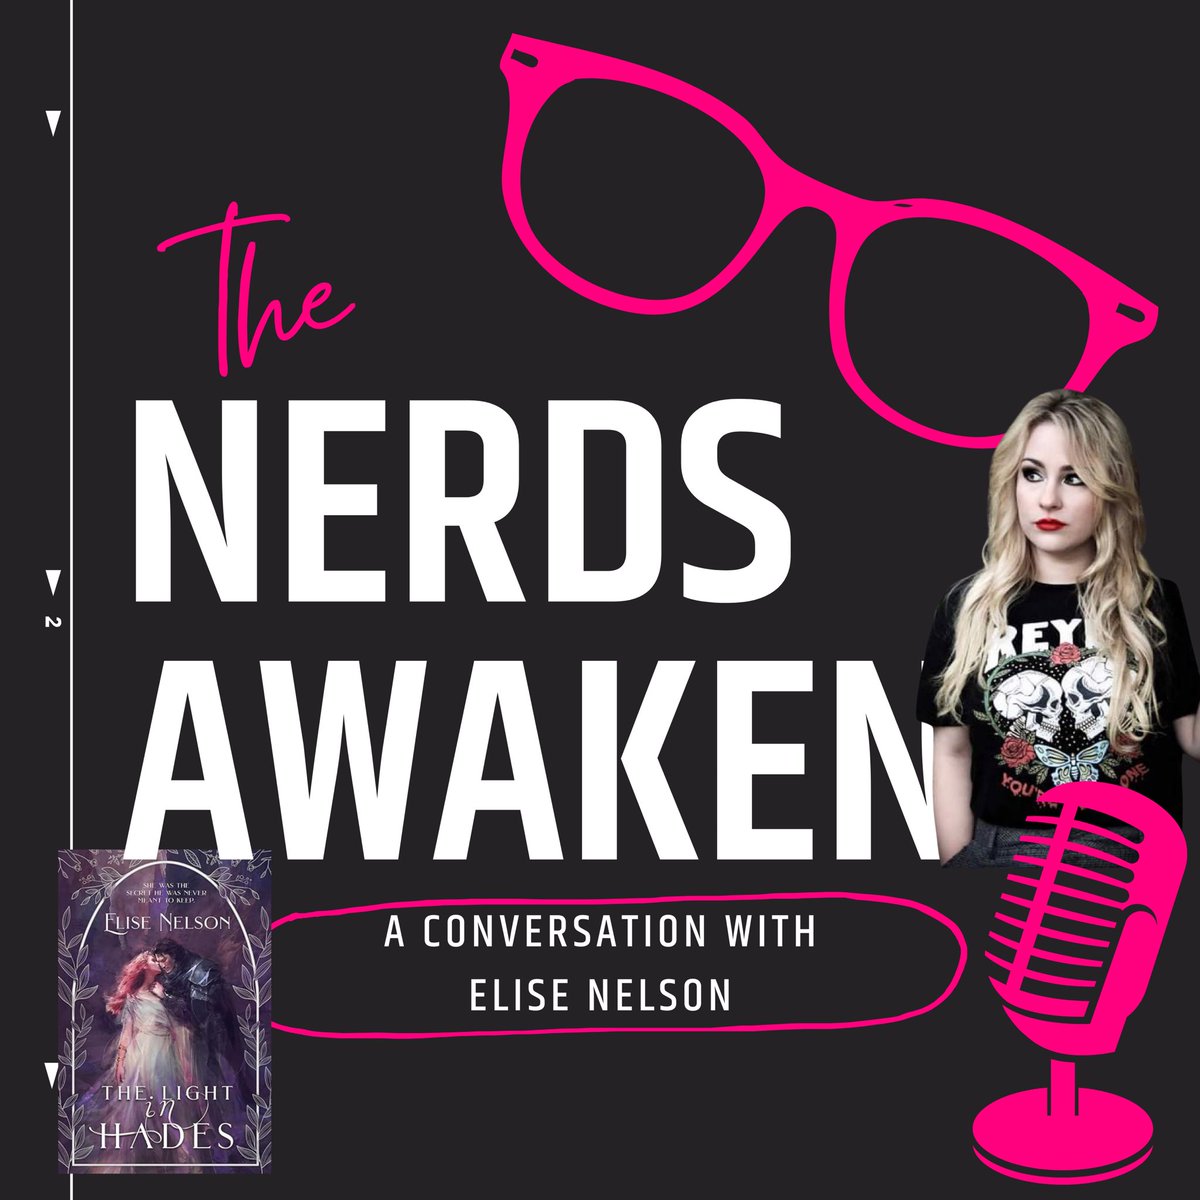 🎙️NEW EPISODE🎙️

We have a very special guest back on The Nerds Awaken! Back in 2021 @enelsonauthor was the very first author and #Reylo we interviewed, and now she’s back to chat about her new novel THE LIGHT IN HADES.

#podcasts #books #authorinterview 

podcasts.apple.com/us/podcast/the…